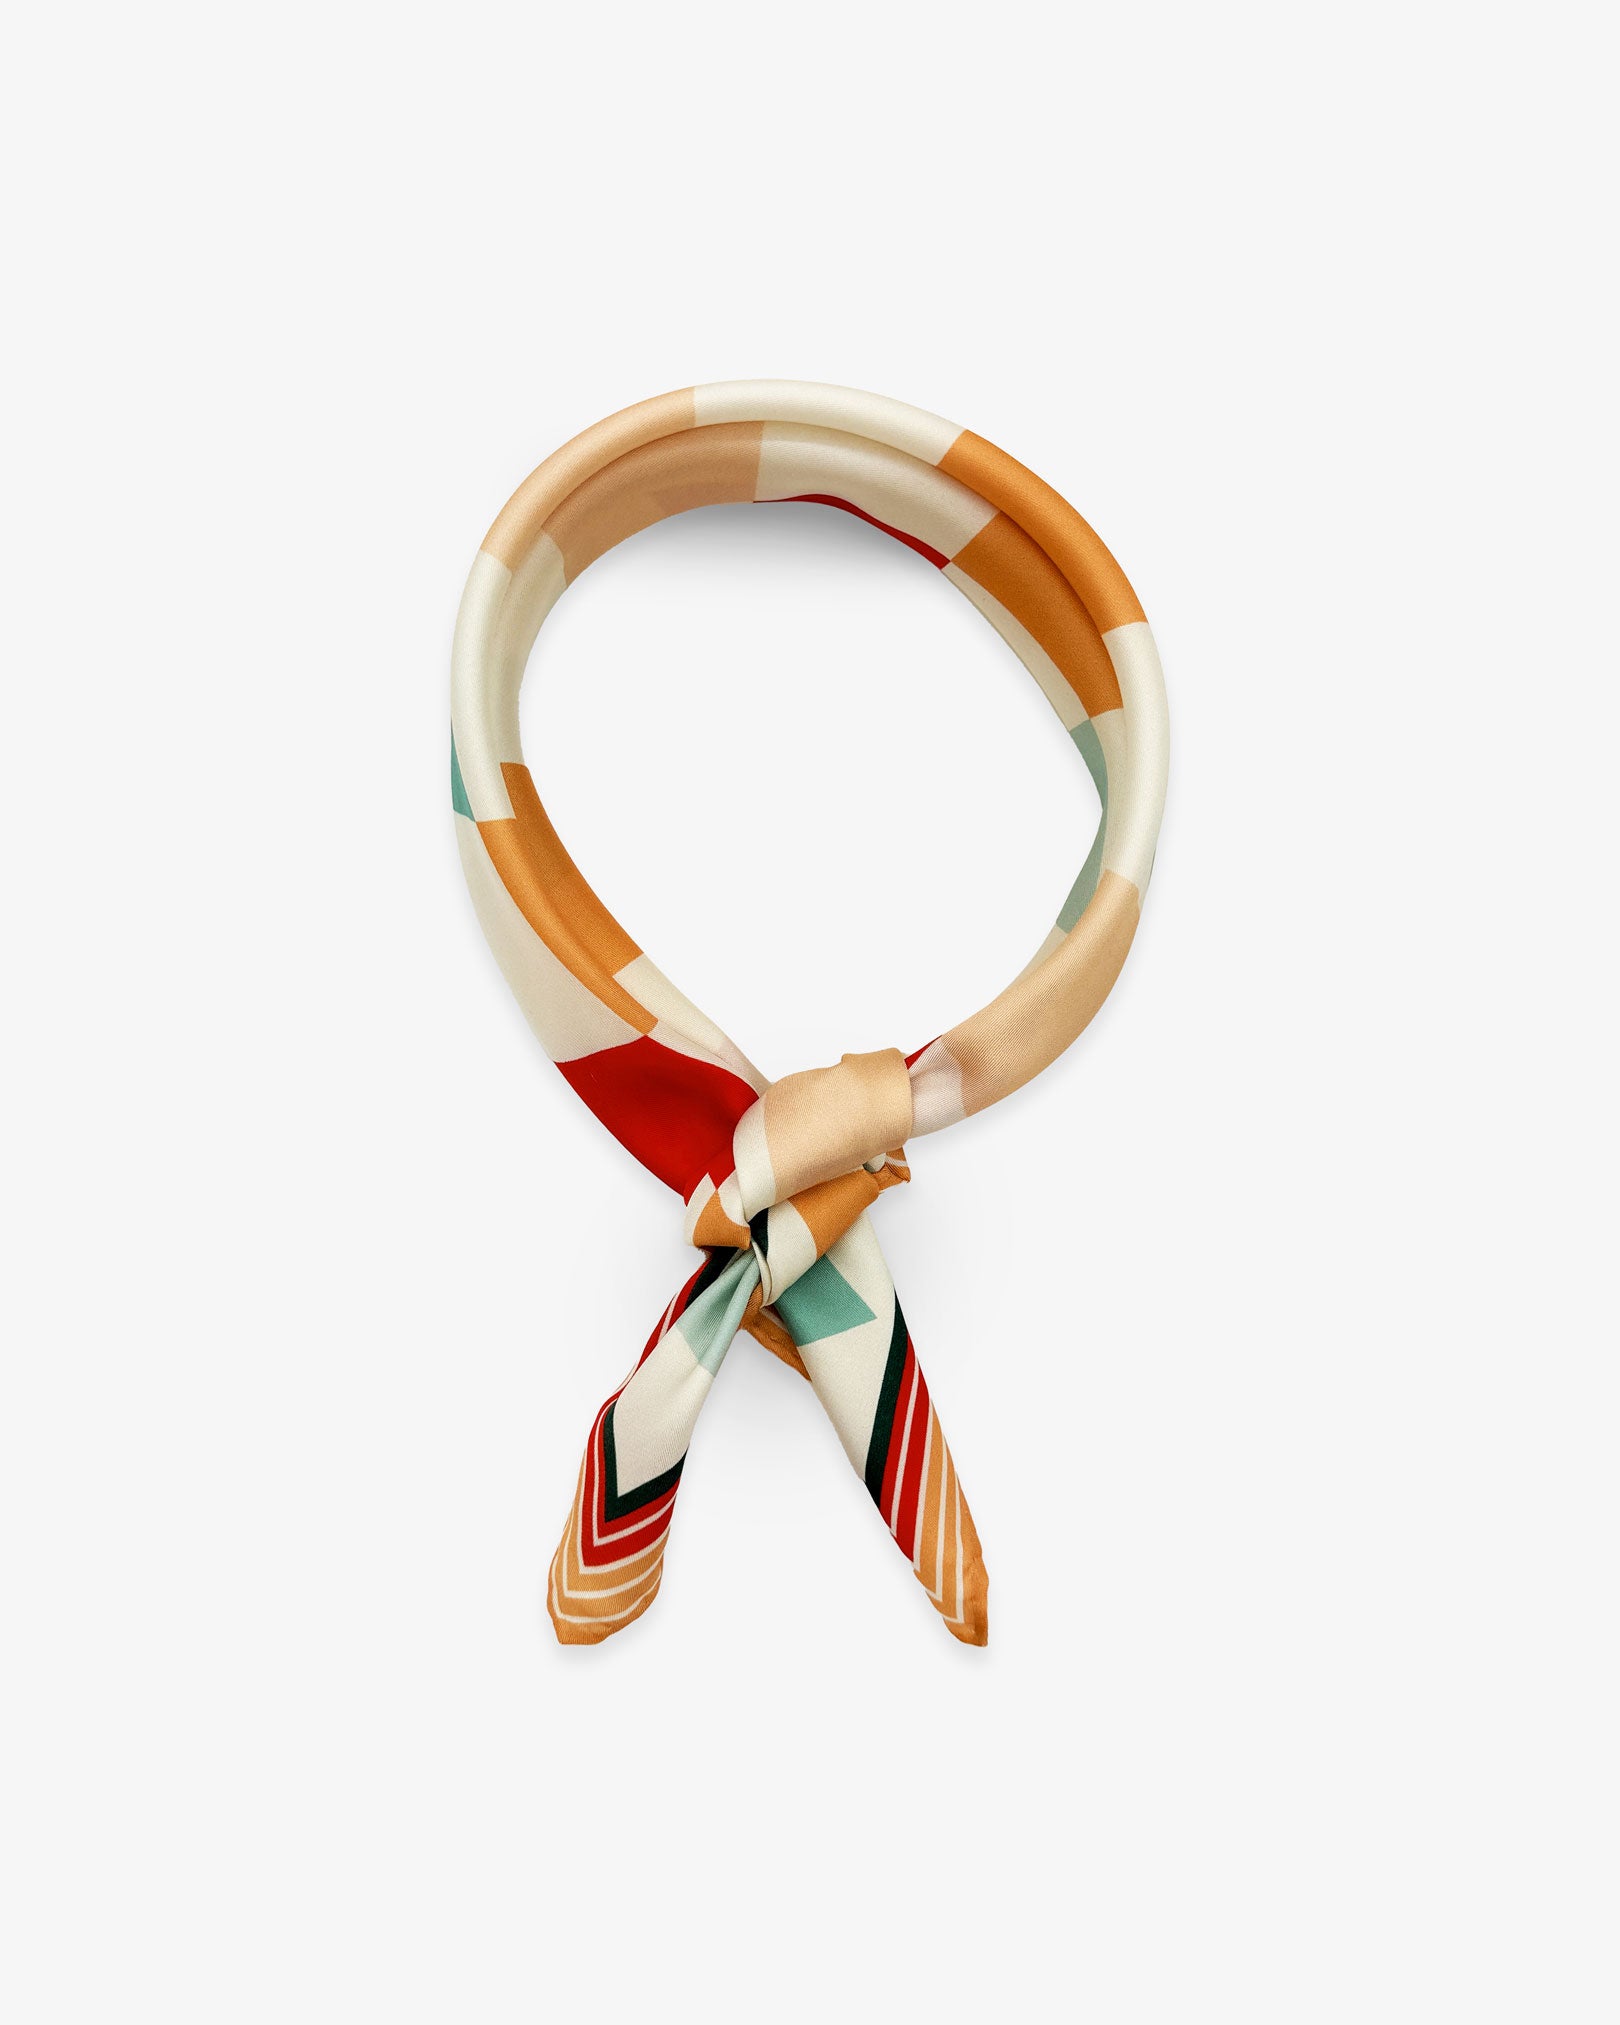 The 'Diamonds' silk neckerchief from SOHO Scarves knotted and looped against a white background.